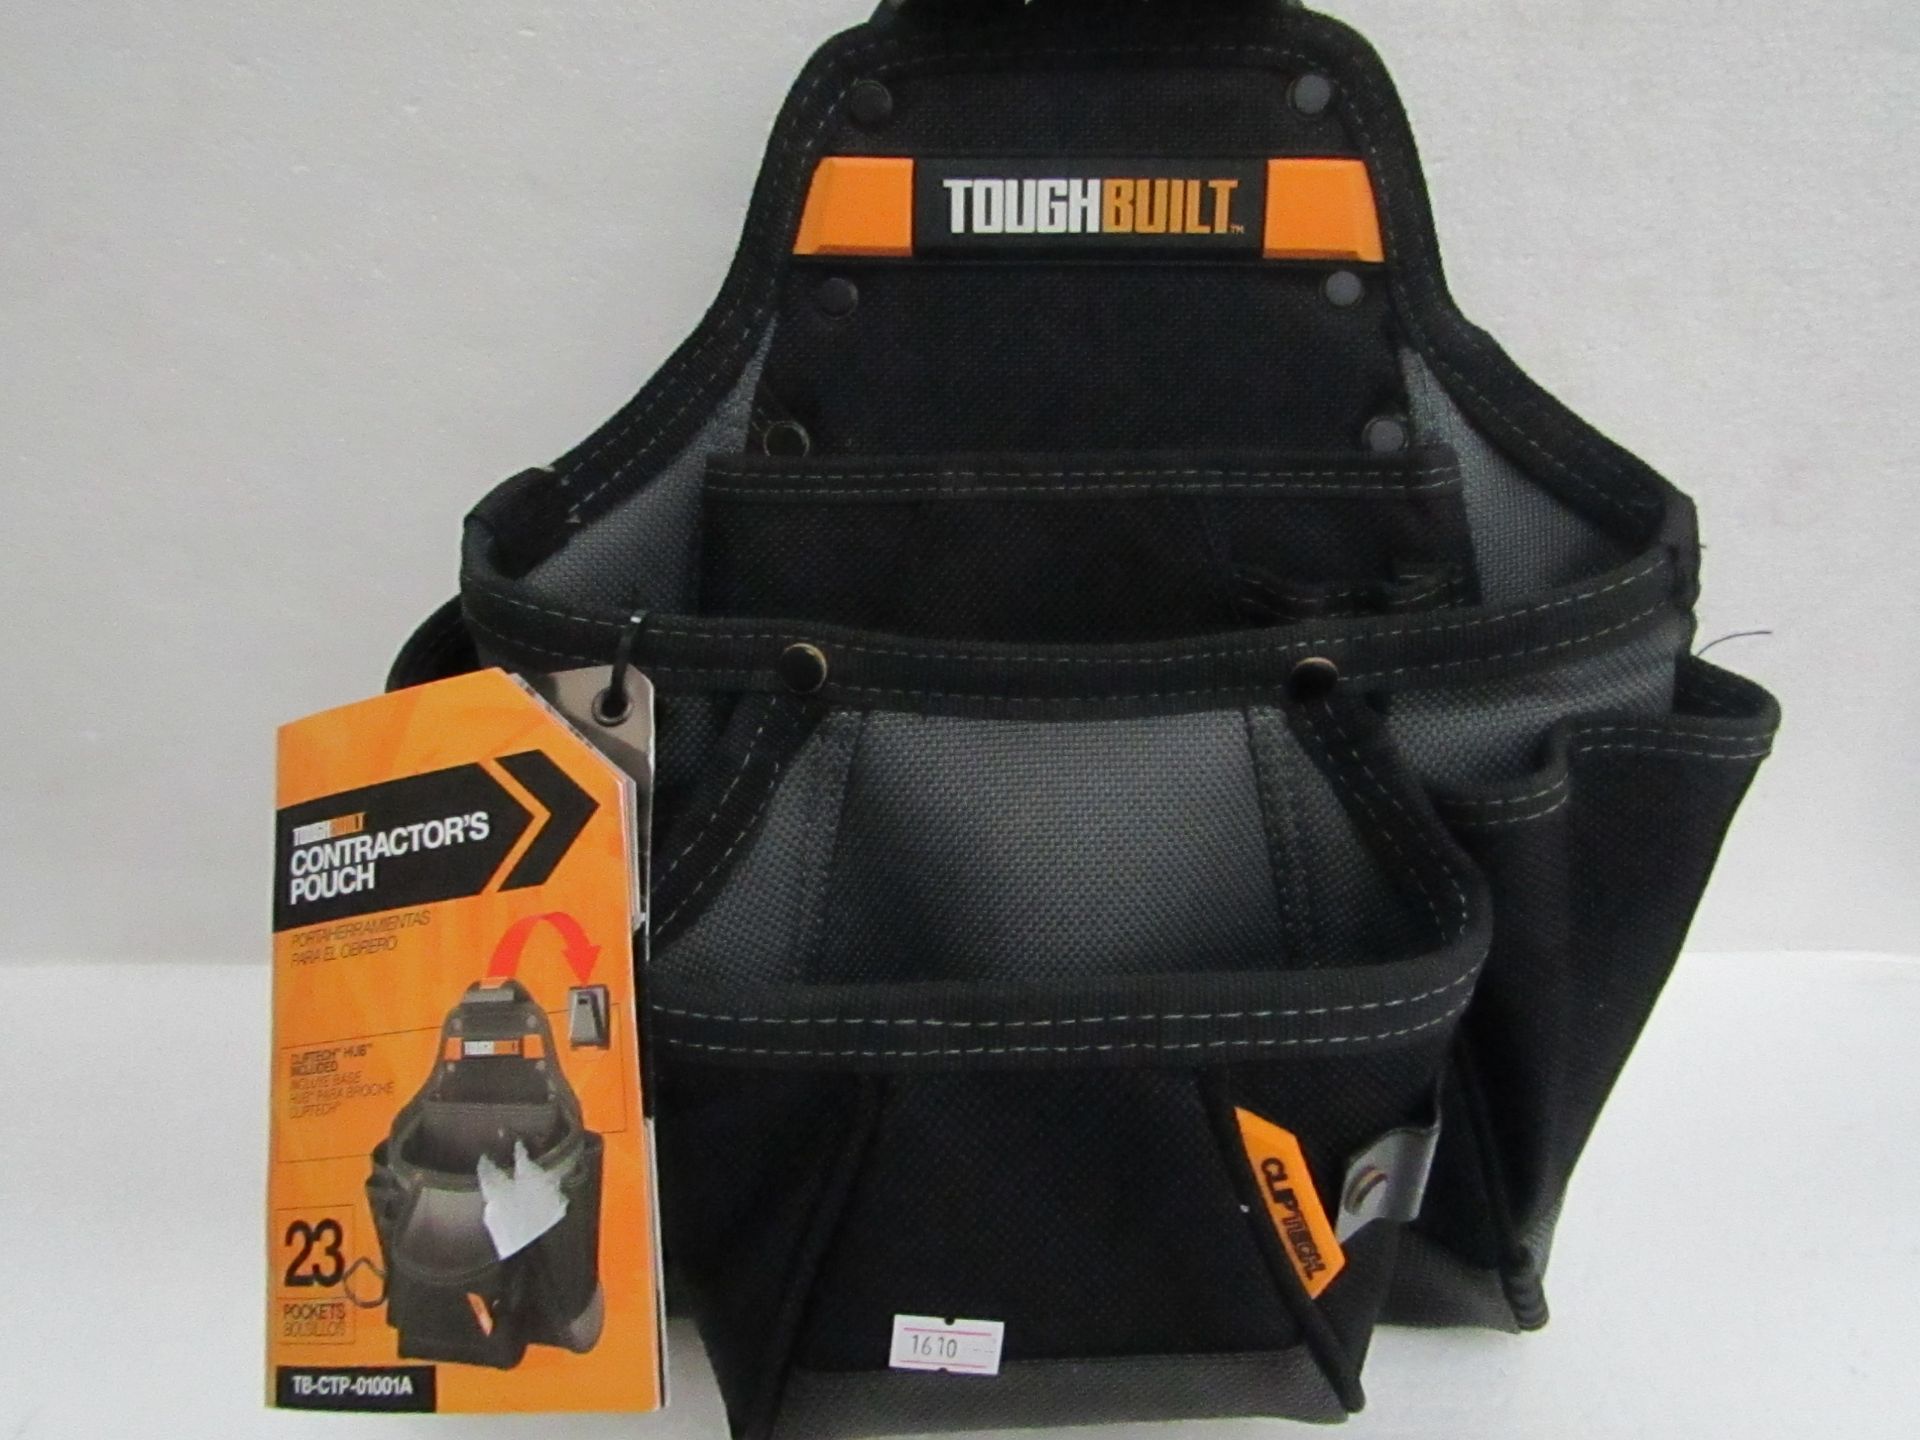 Tough Built - Contractor's Pouch - Unused & Boxed.